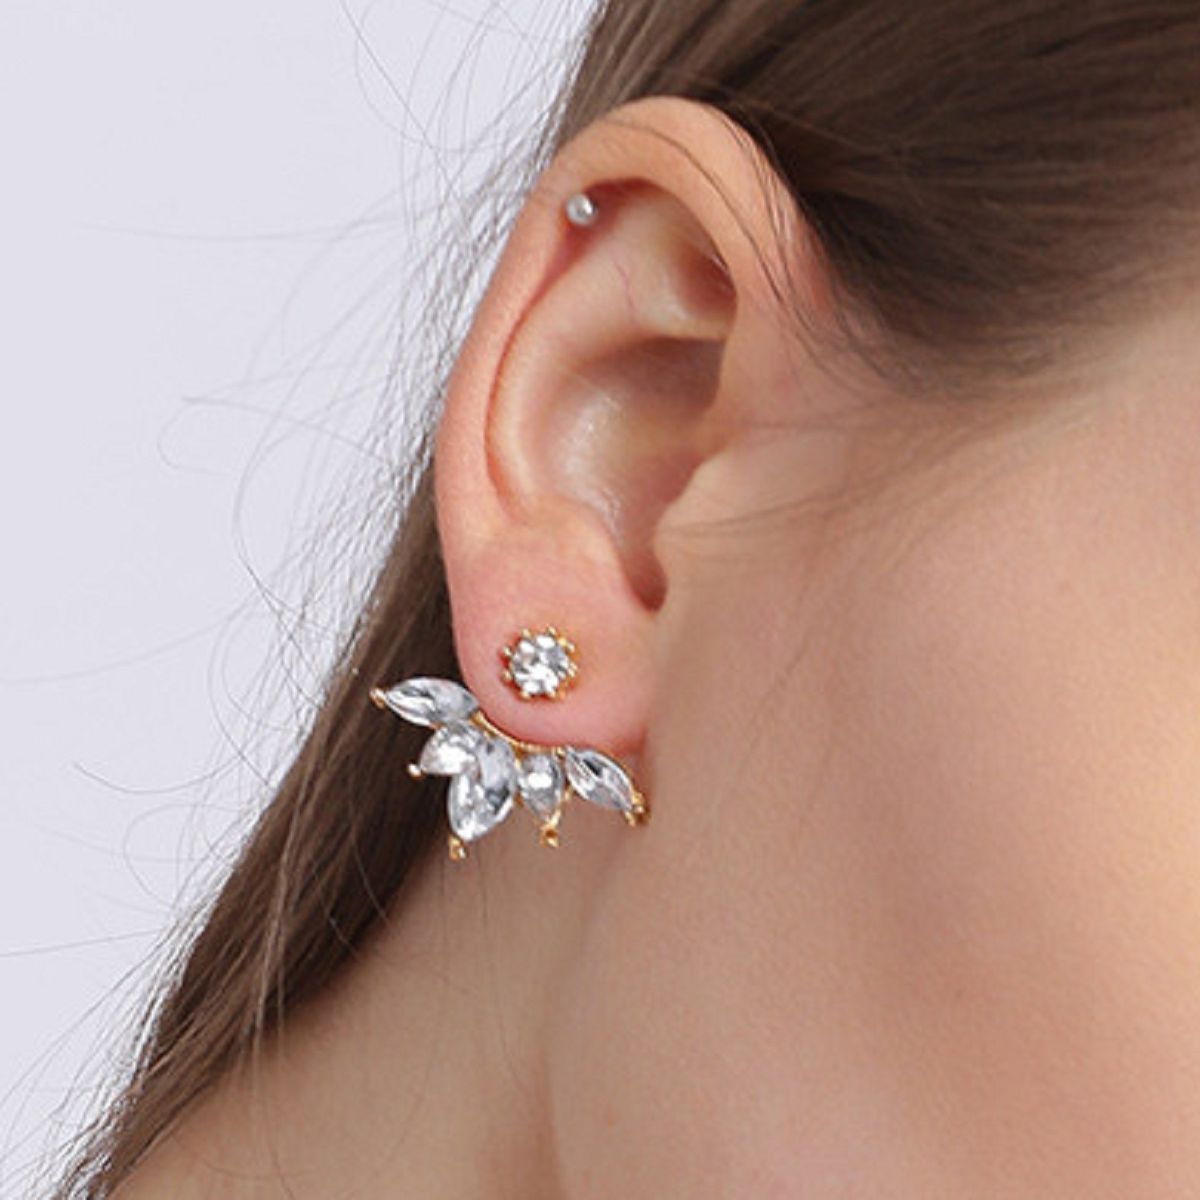 Premium Quality Cz Stone Earrings With Fill White Stones Earring Hanging  Single White Pearl Buy Online